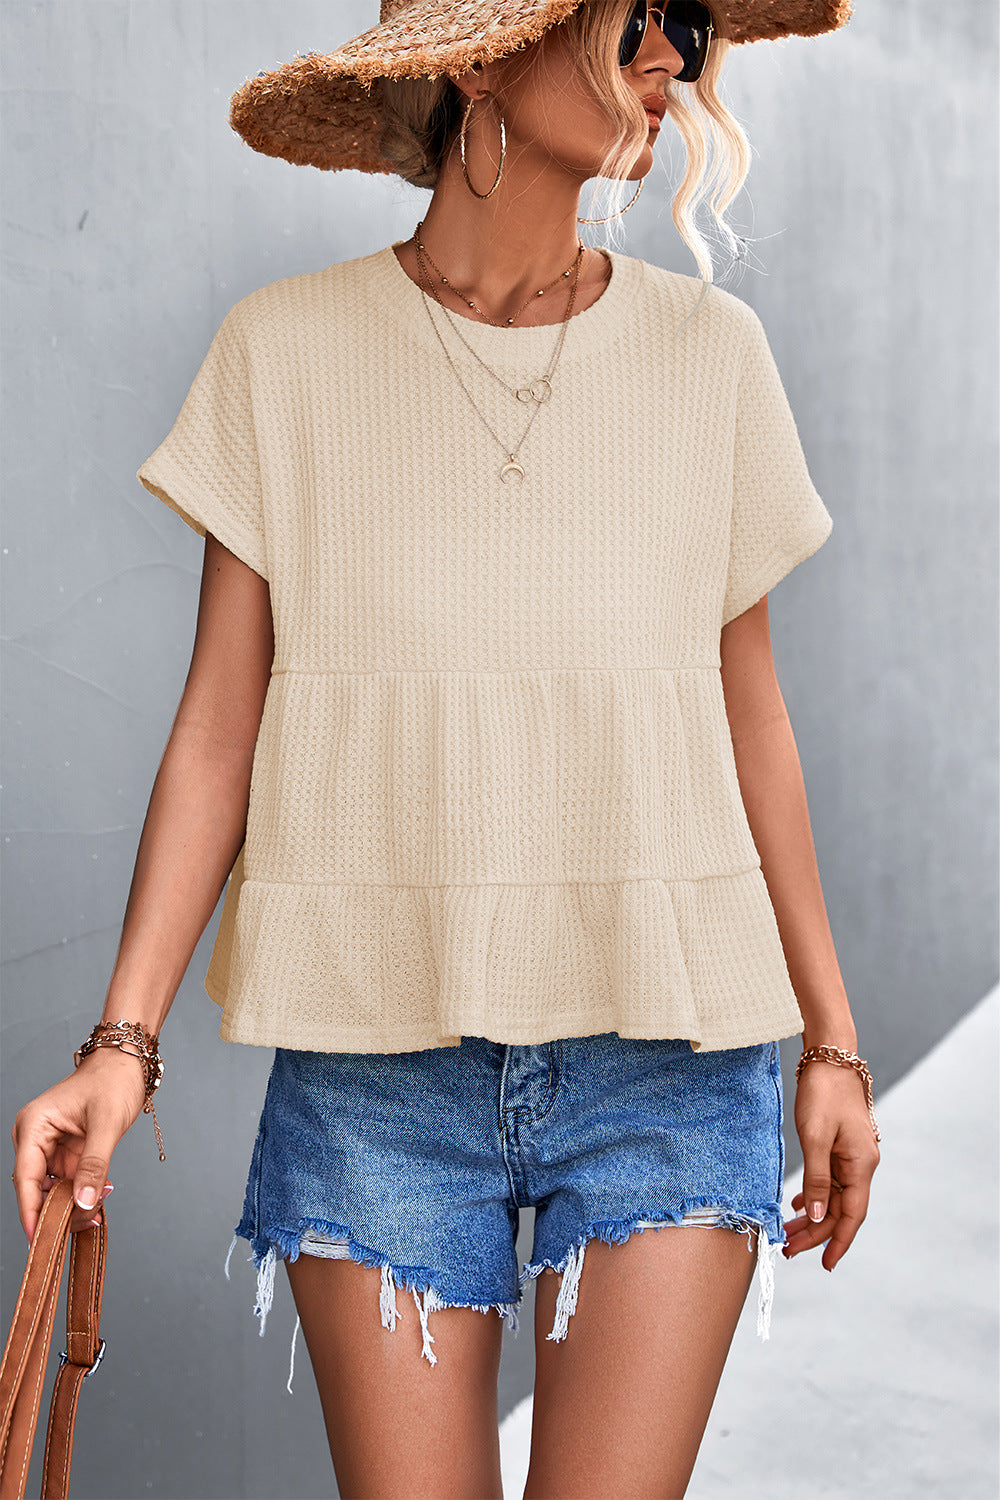 round neck breasted short sleeve stitching top for women